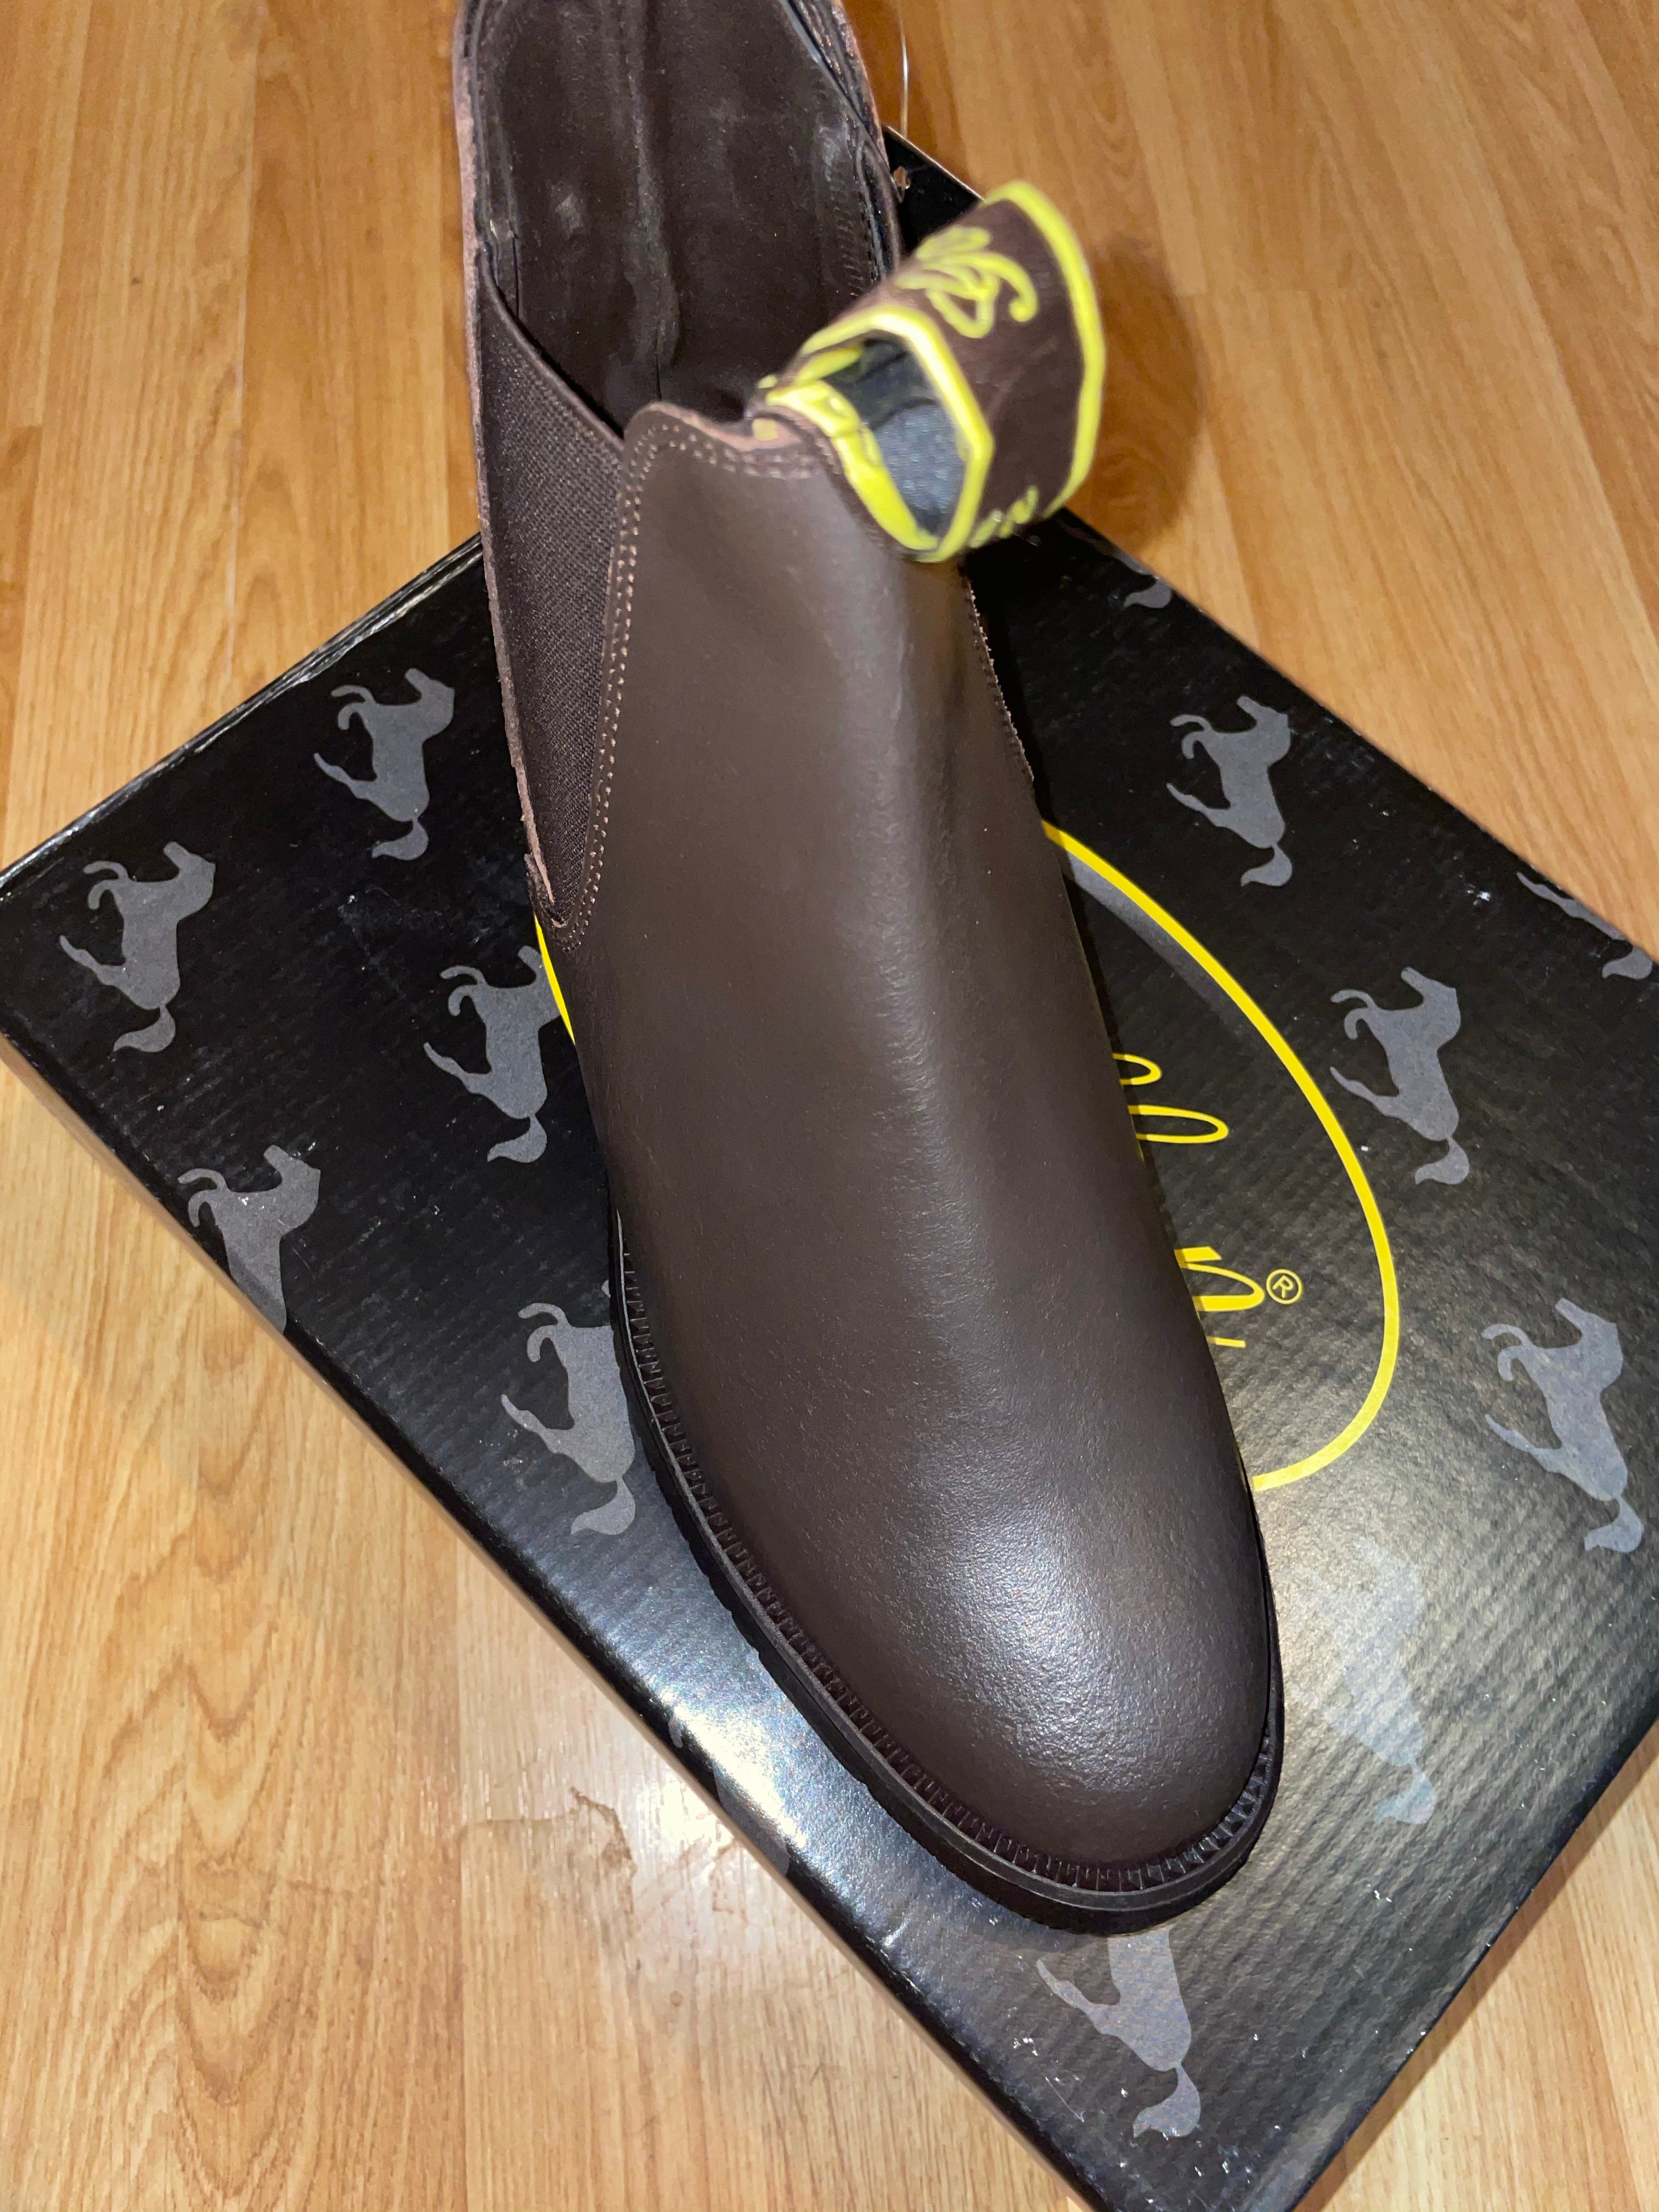 Gallop Lifestyle Brown Jodphur Boots - Size 4 5 6 7